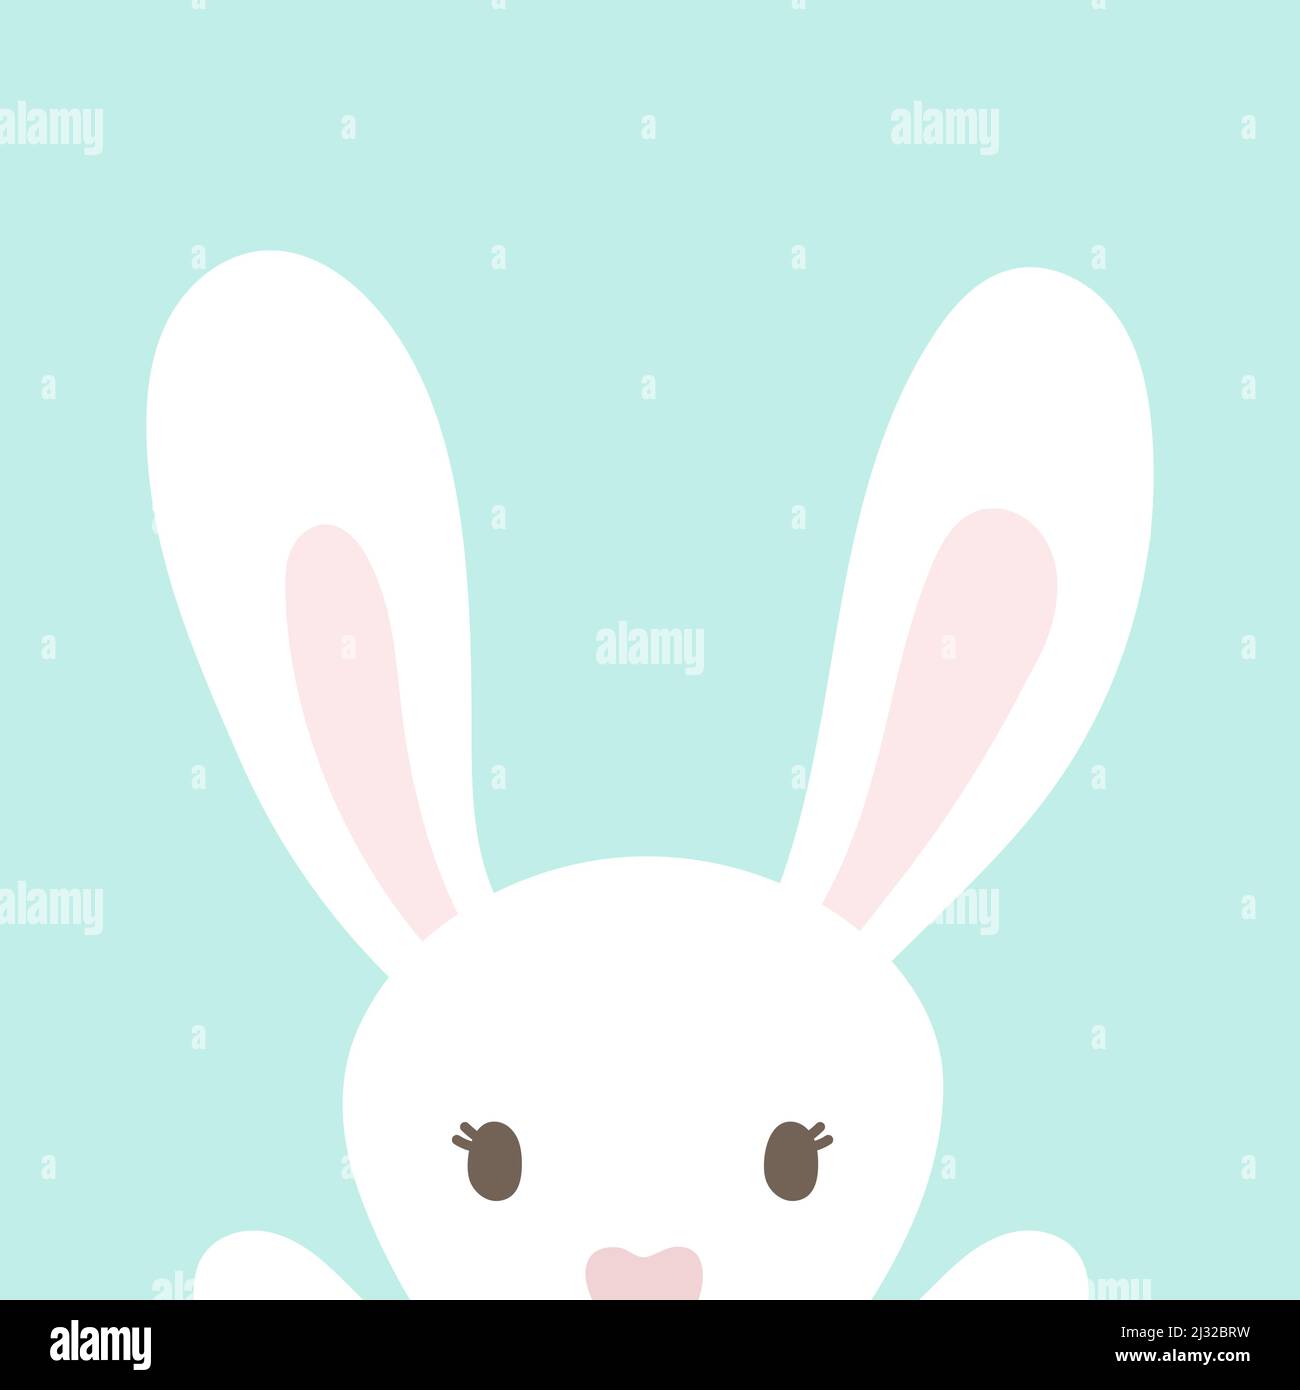 https://c8.alamy.com/comp/2J32BRW/cute-white-bunny-peeking-out-happy-easter-pastel-colors-for-greeting-card-poster-banner-vector-illustration-flat-design-2J32BRW.jpg